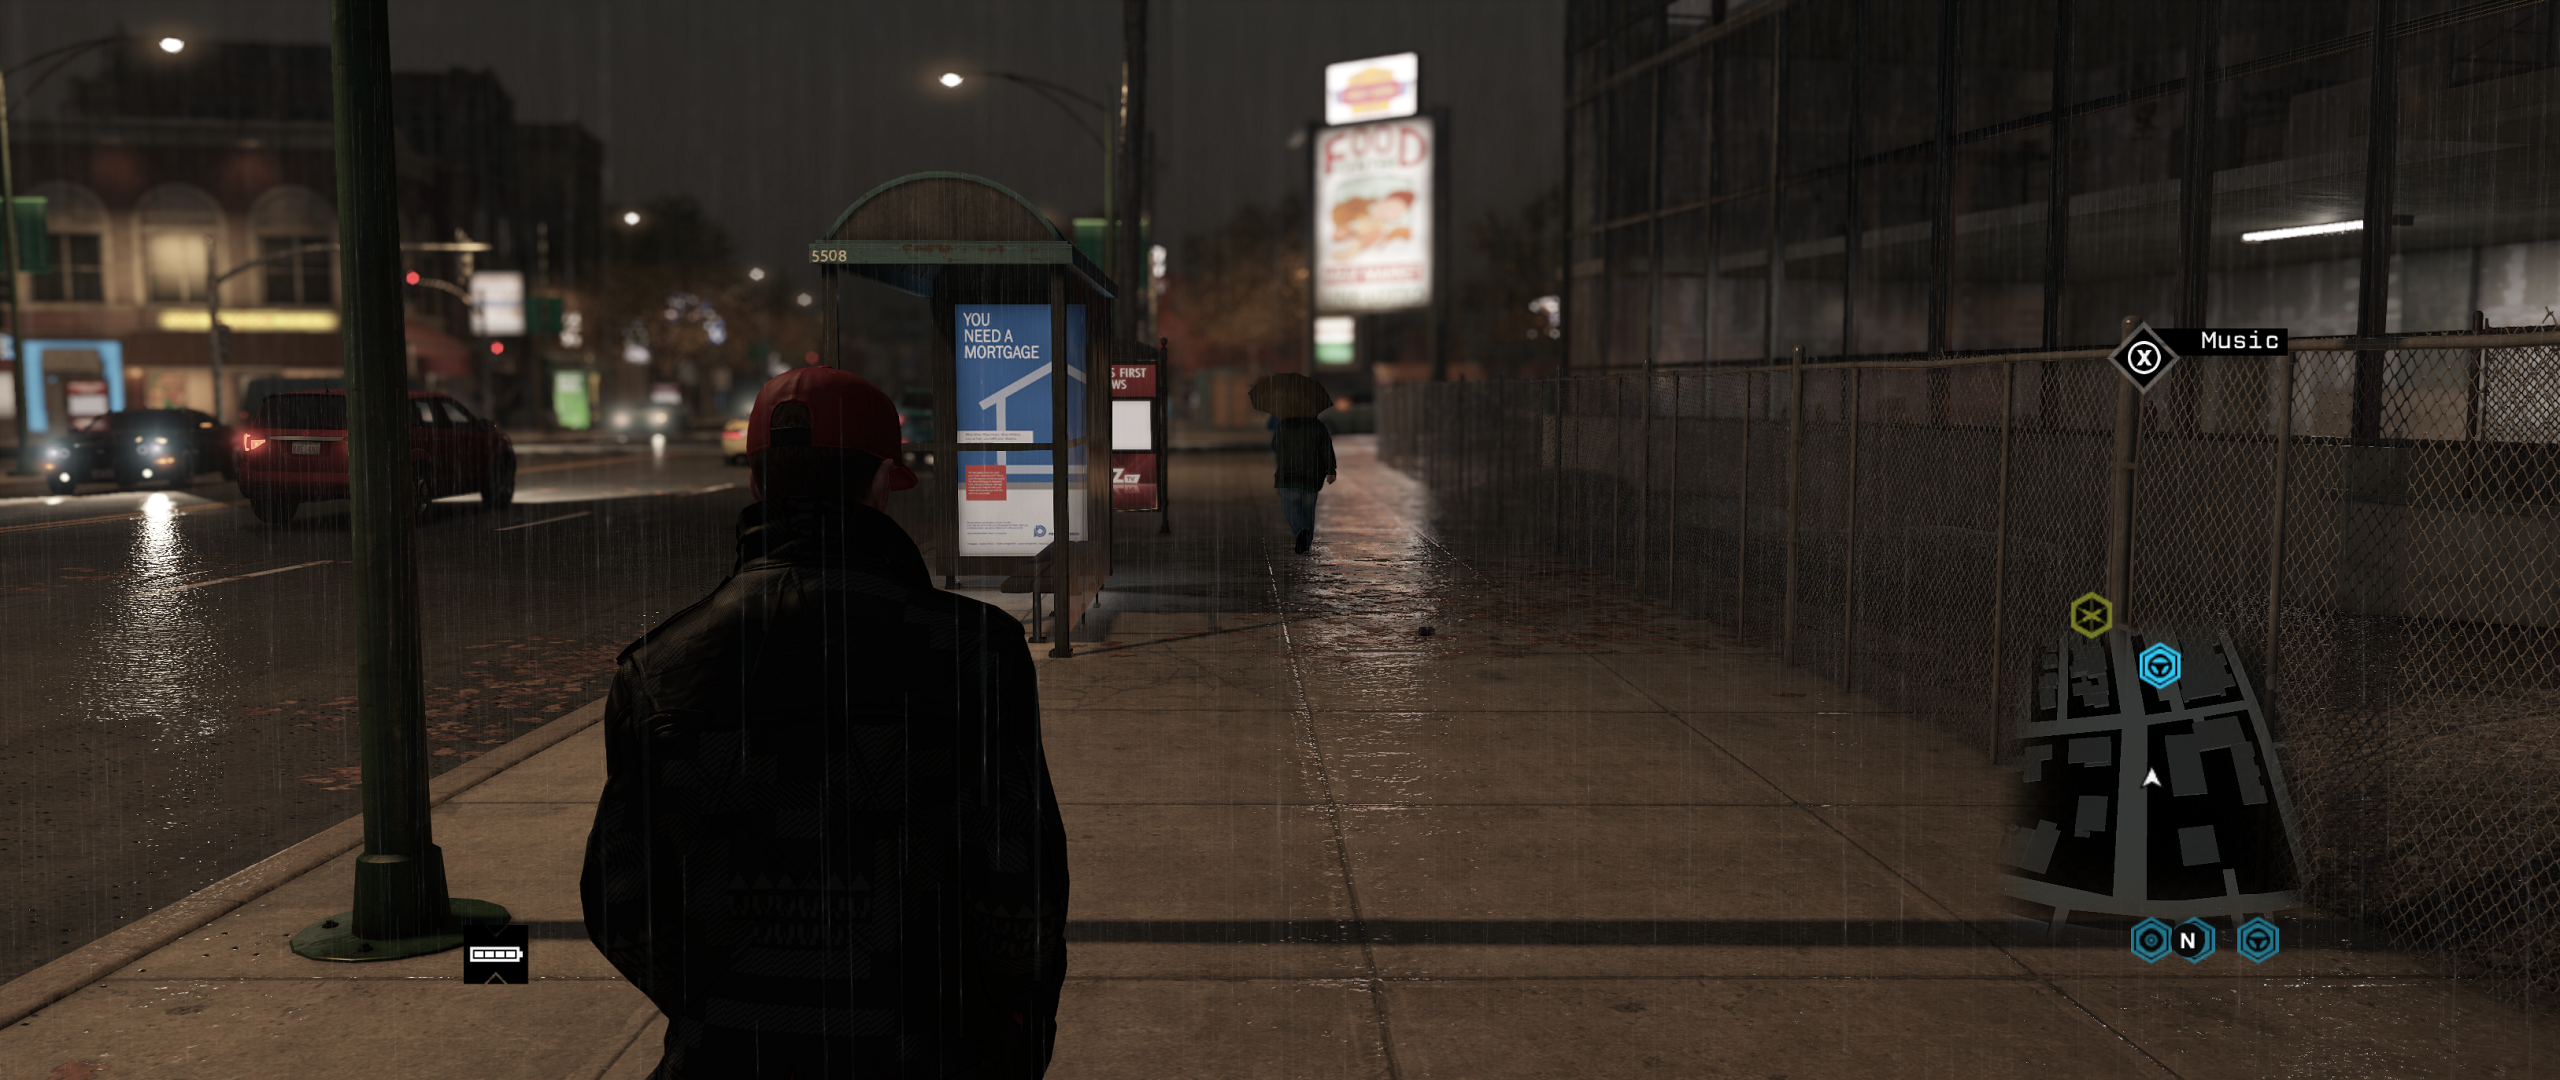 watch_dogs2014-06-161yejz6.png